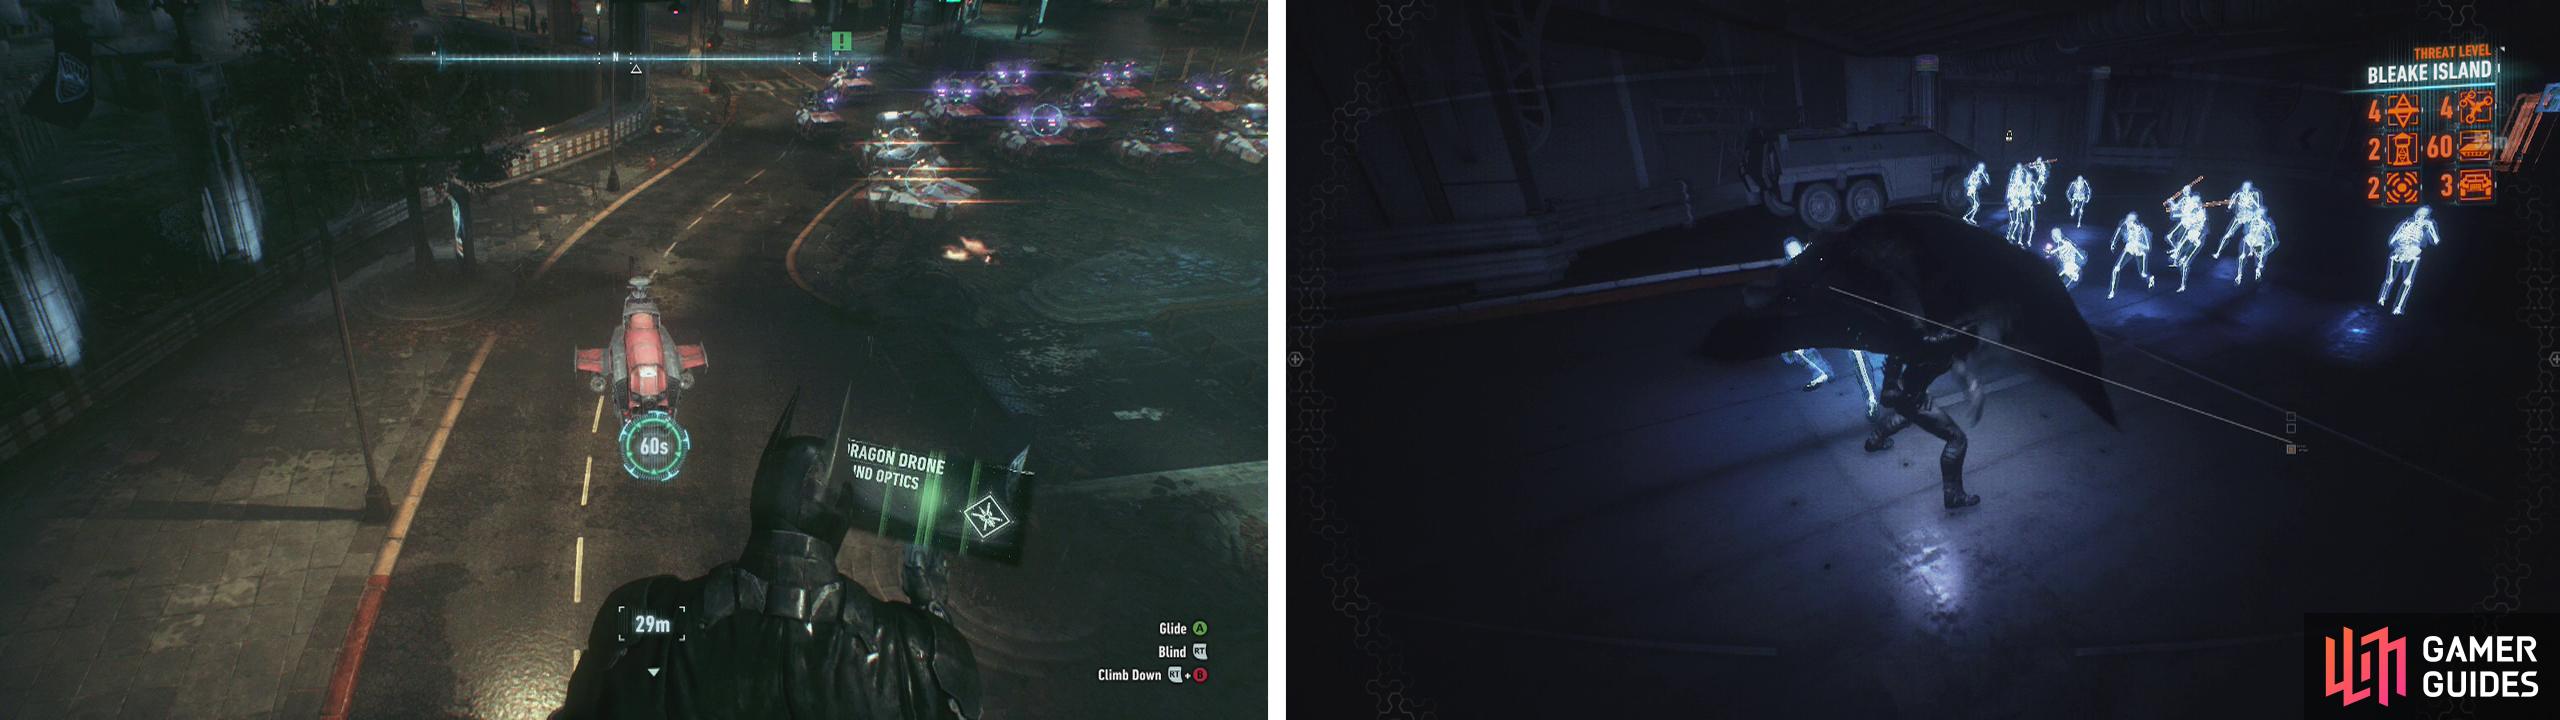 Use the Remote Hacking Device on the Dragon Drone (left) and then duck into the garage to take on a large number of militia (right).